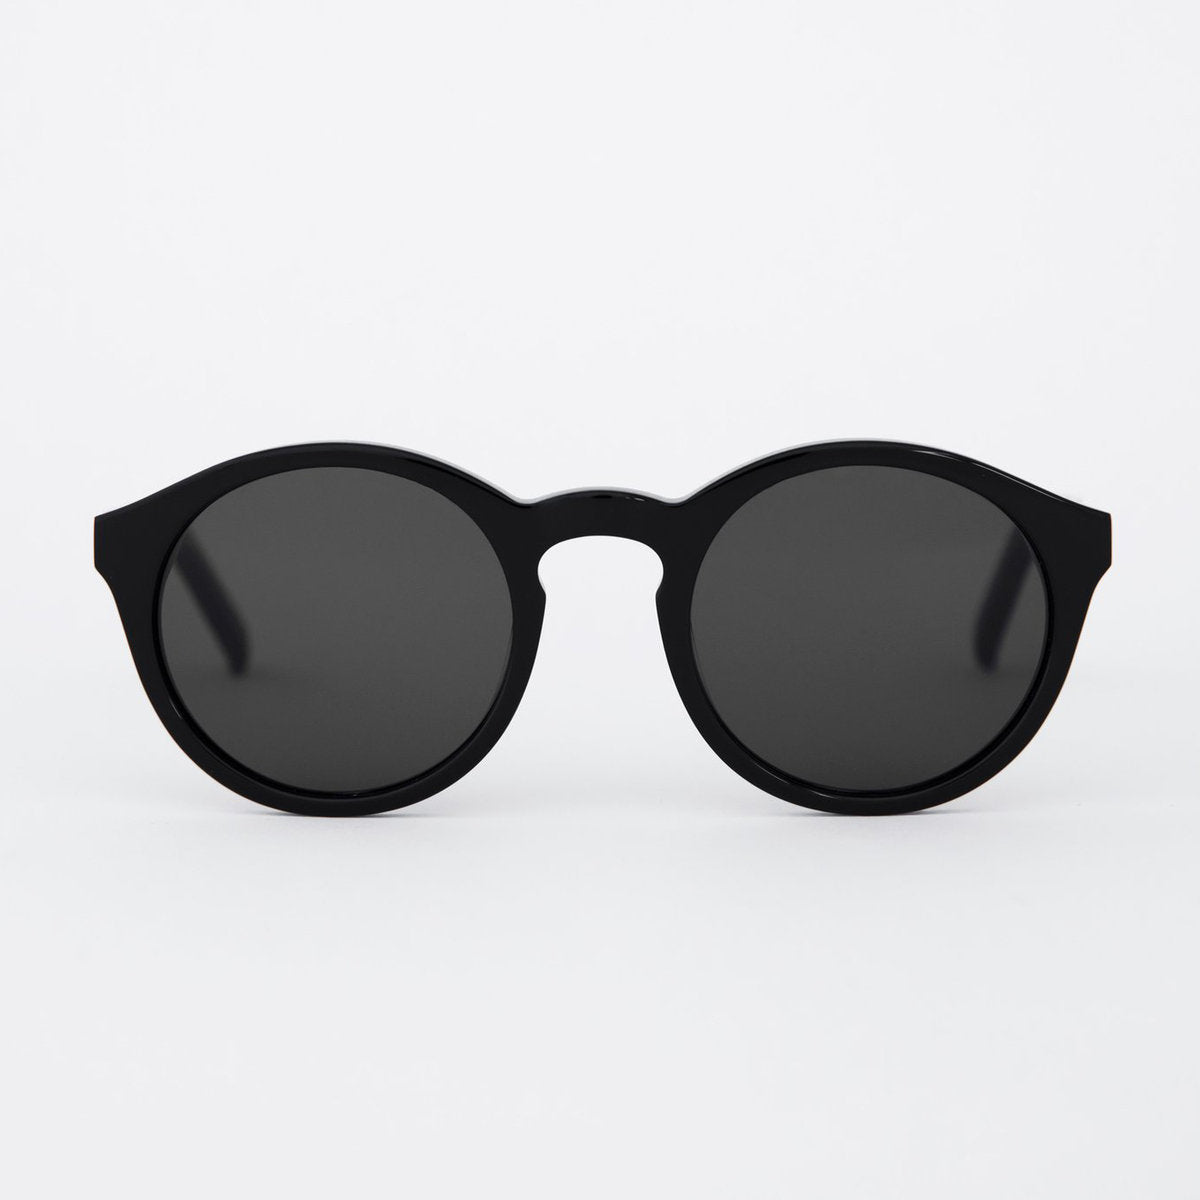 Barstow Black & Grey Solid Lens